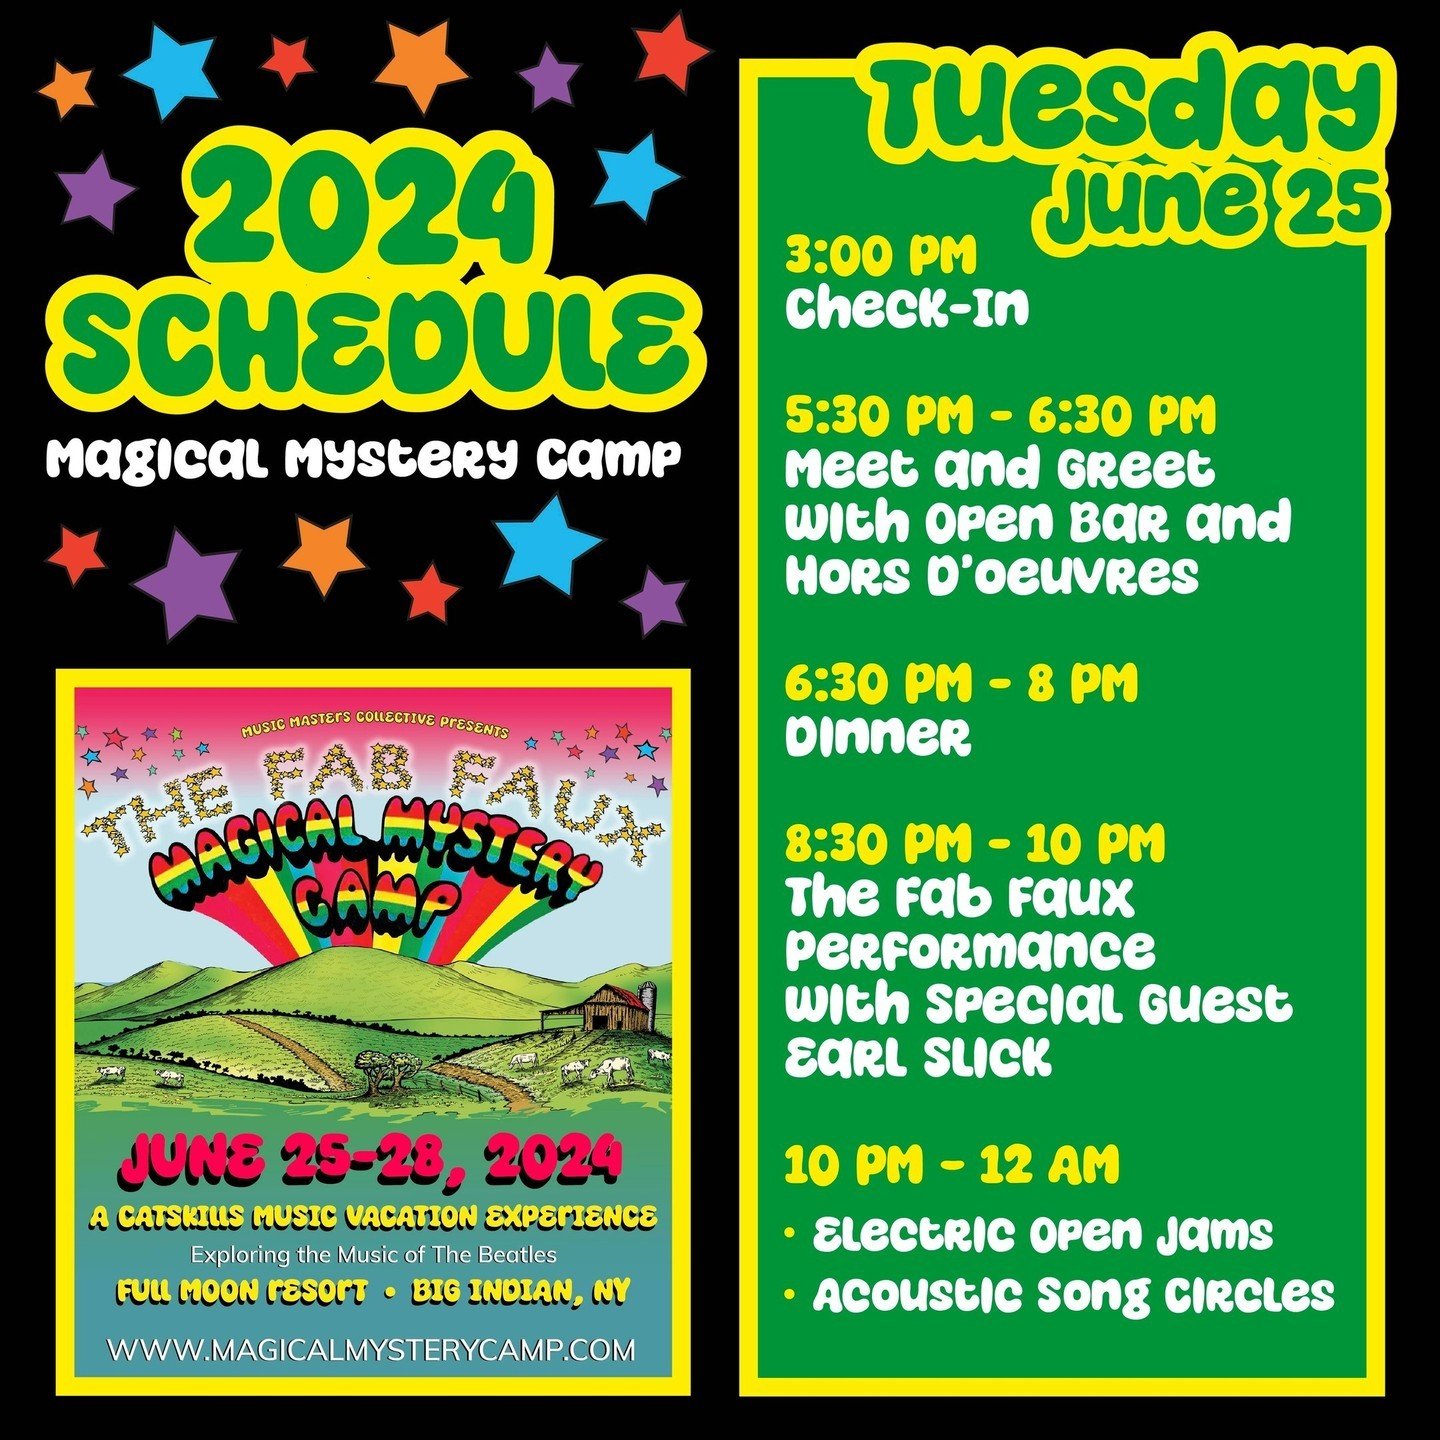 Magical Mystery Camp is just over a month away! Let's kick off the summer by sharing our love for the music of the Beatles 🌈 ⁠
⁠
The schedule is packed with more jam time, more masterclasses, more performances, and tons of fun. There are a few spots